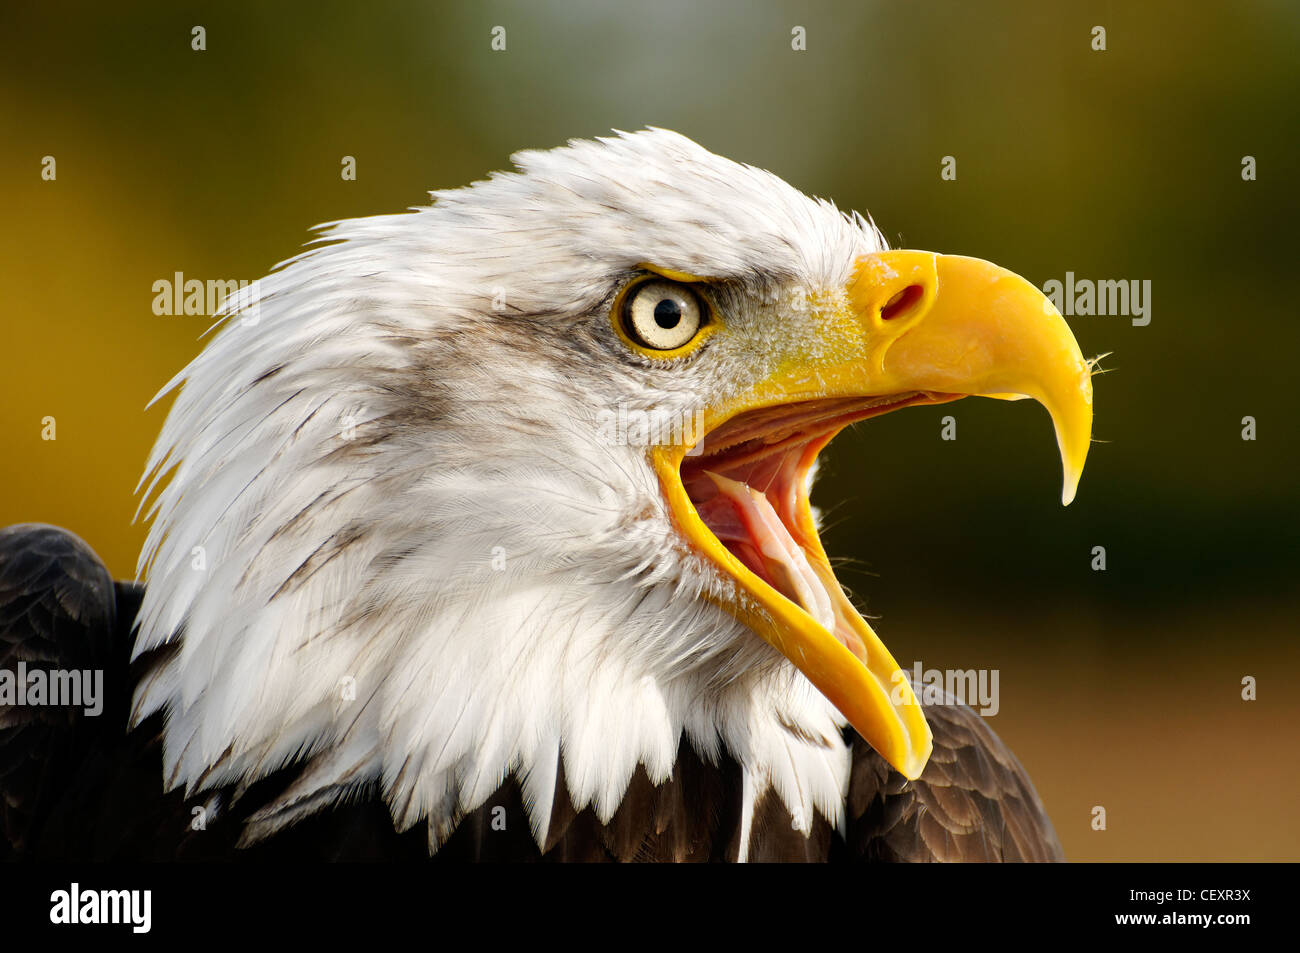 An American Bald Eagle with its beak open Stock Photo